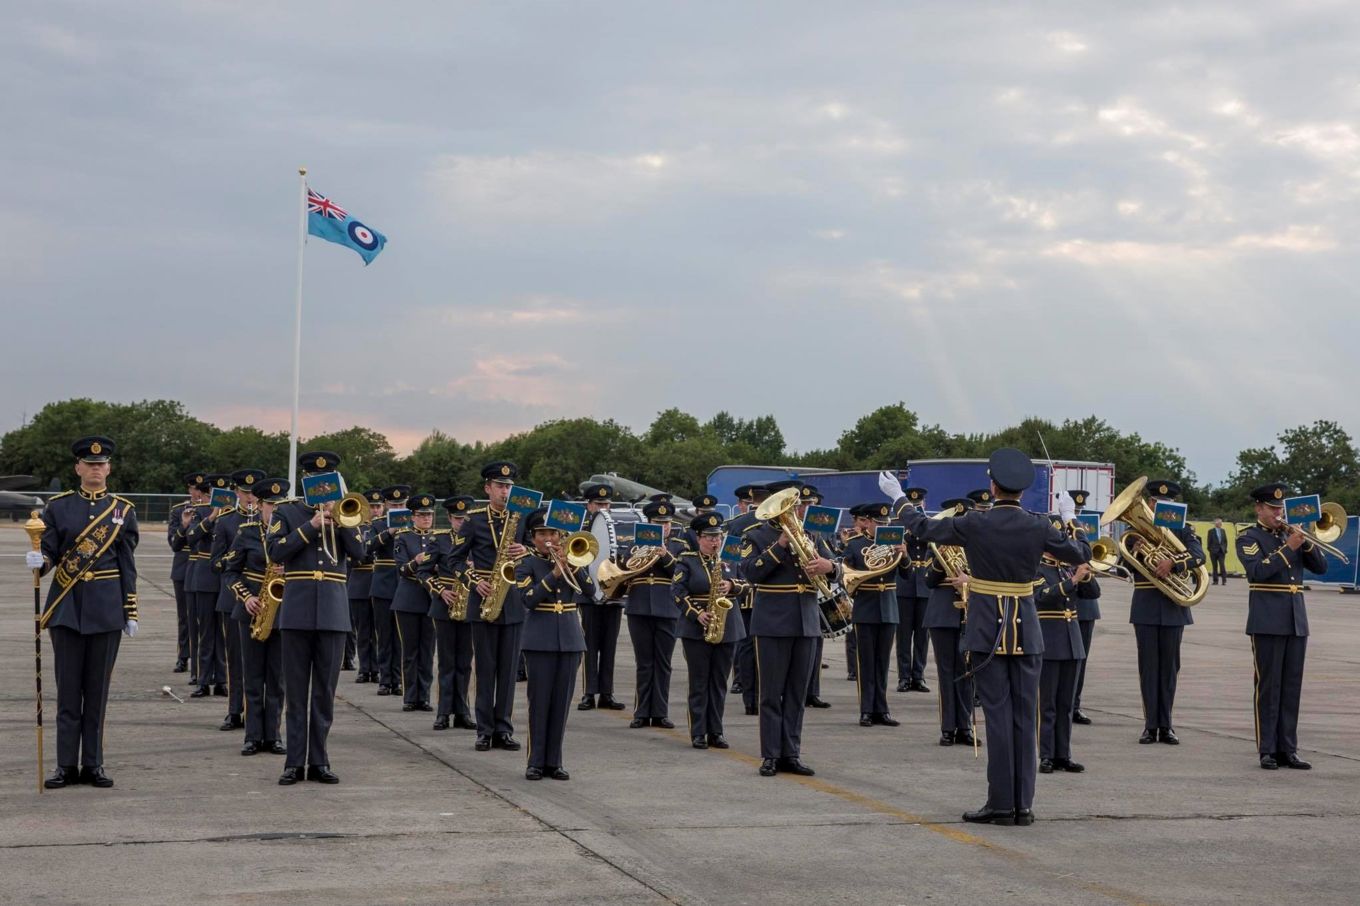 Band of the RAF Regiment play music with the RAF ensign flying above.